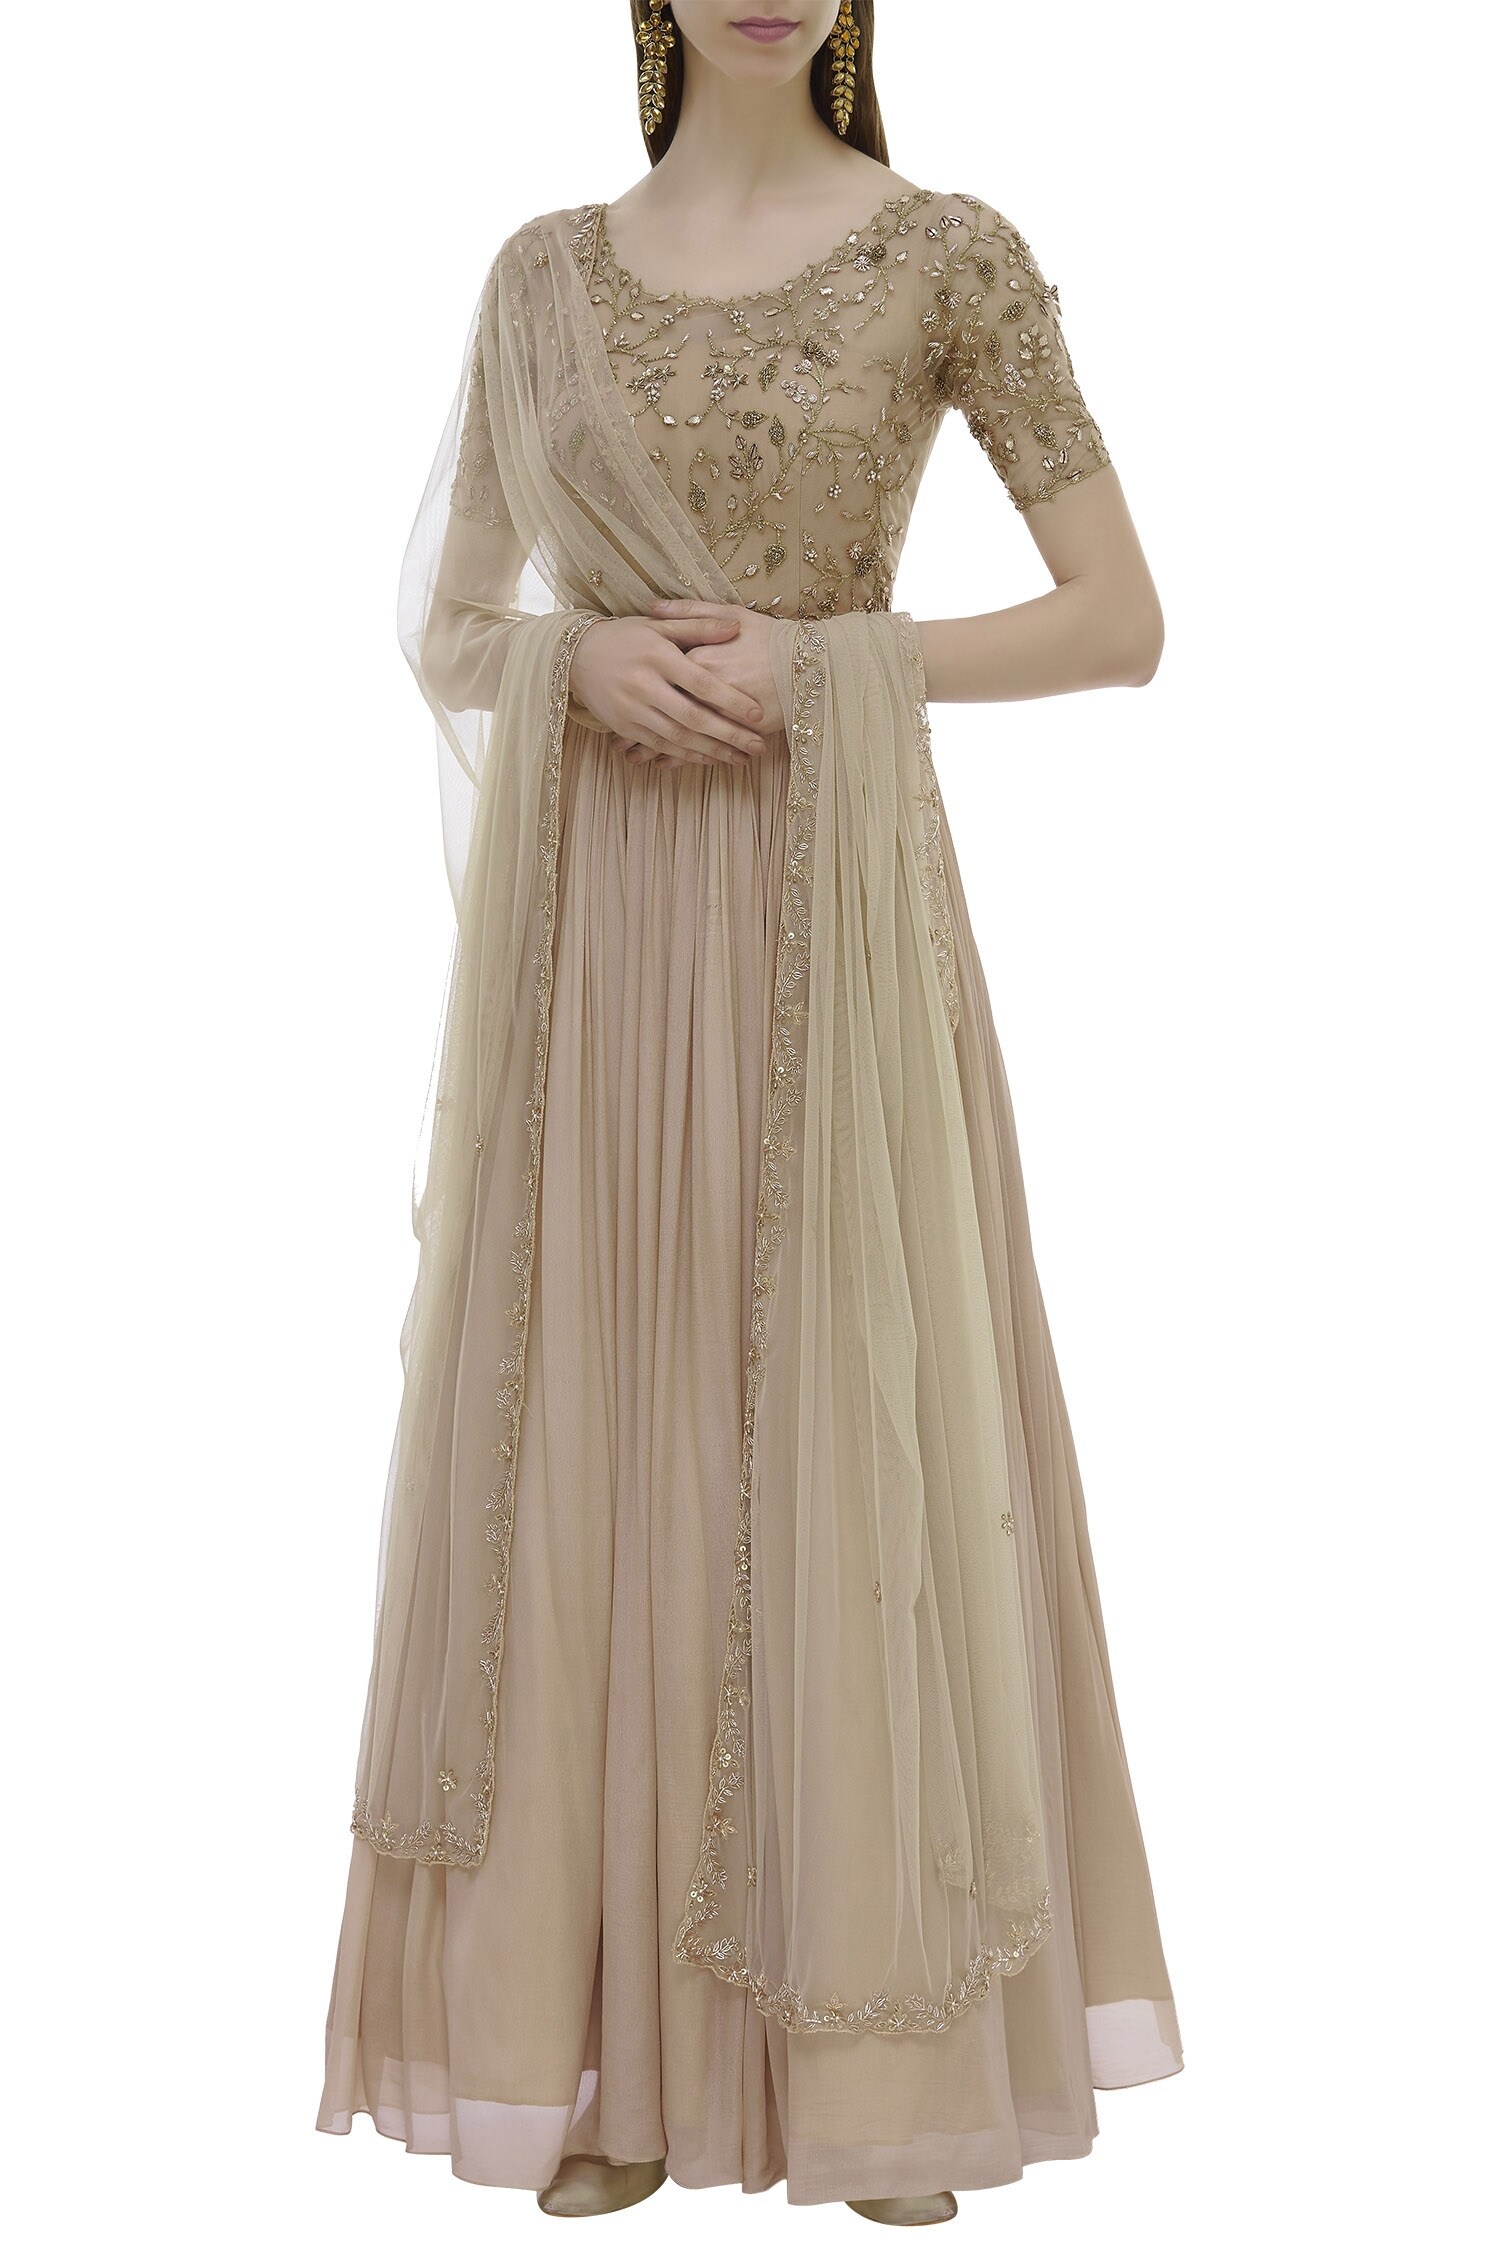 Buy Off White Soft Net Round Neck Embroidered Anarkali With Dupatta For  Women by Pleats by Kaksha and Dimple Online at Aza Fashions.